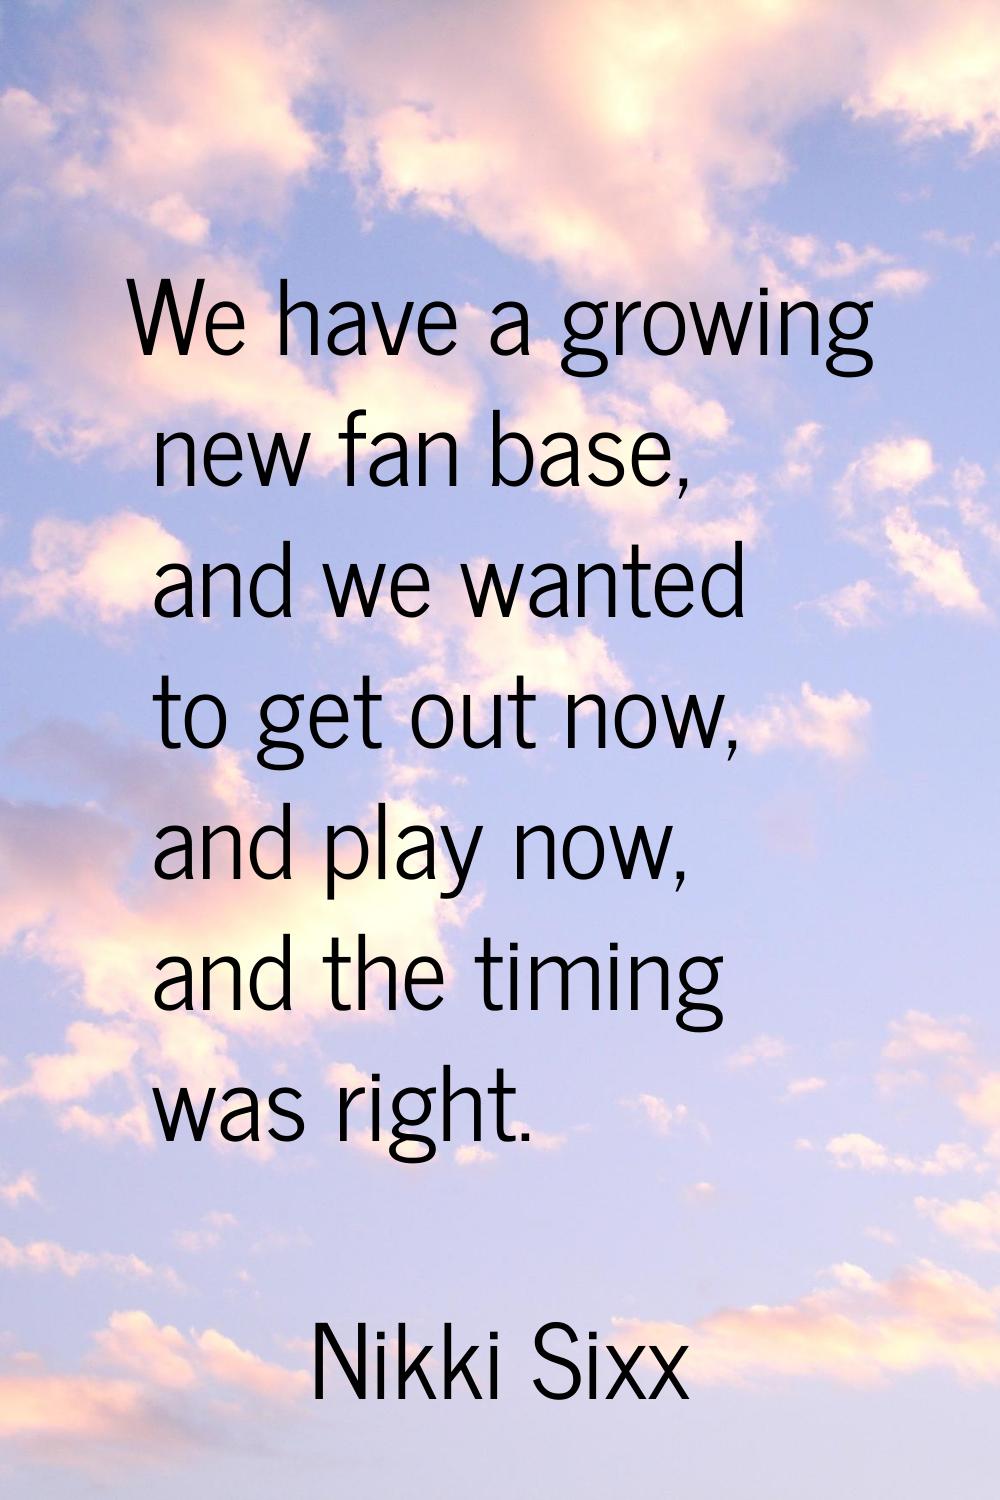 We have a growing new fan base, and we wanted to get out now, and play now, and the timing was righ